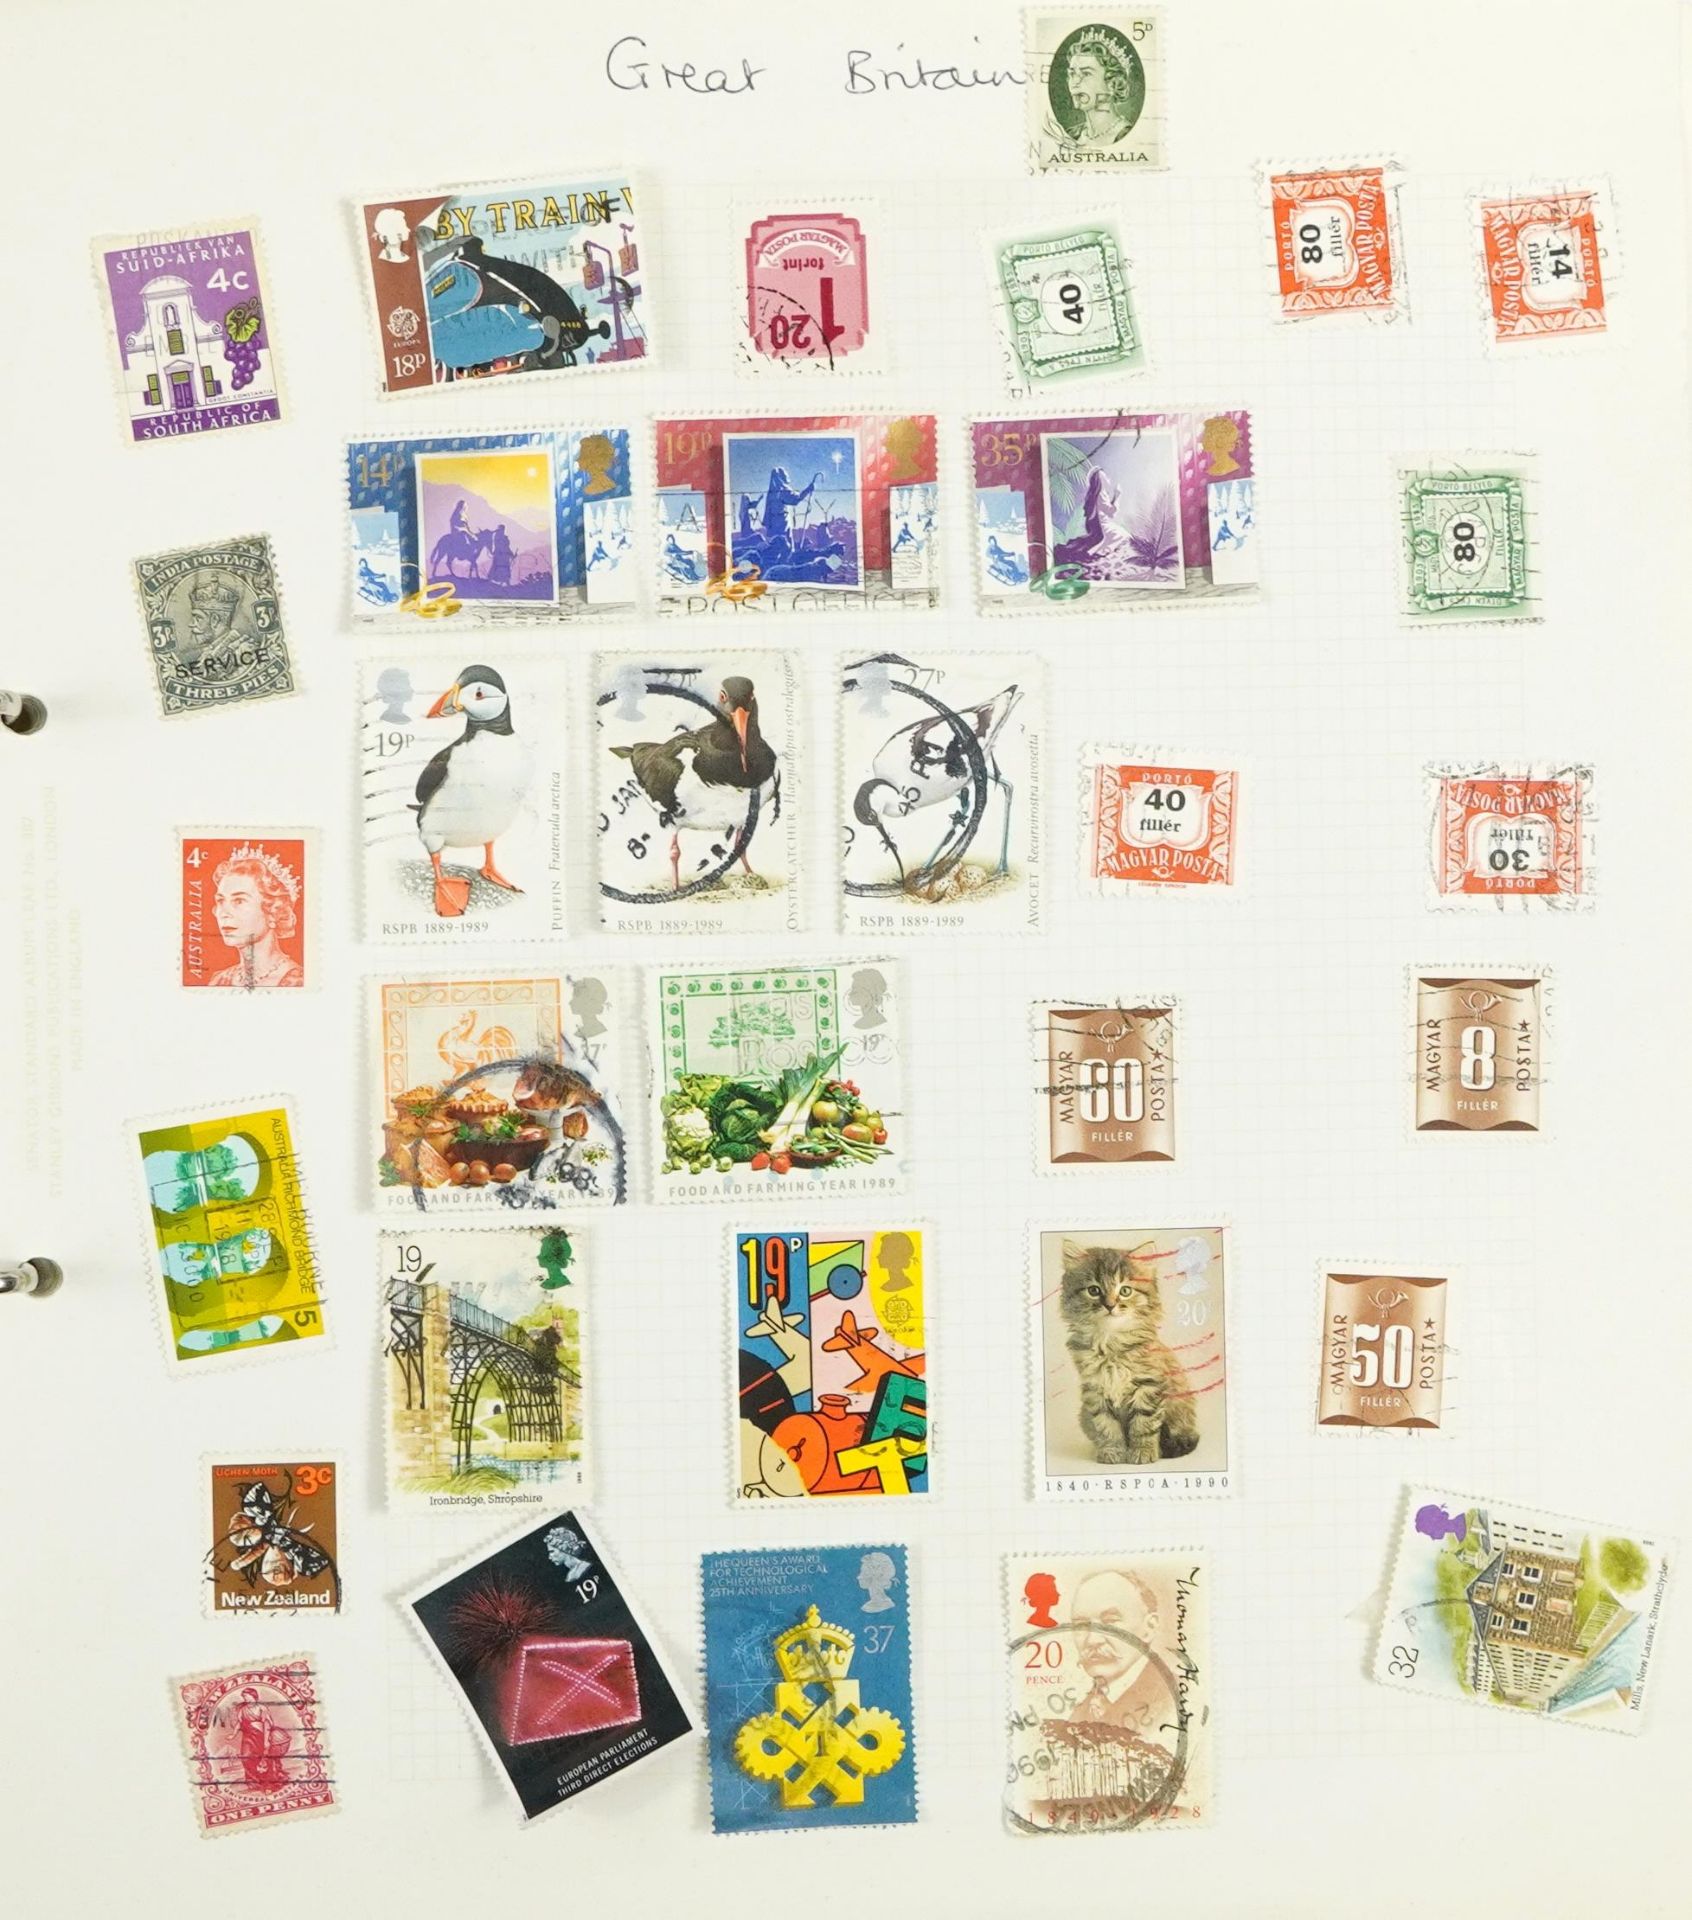 Extensive collection of world stamps arranged in nineteen albums including Cuba, Cyprus, Africa